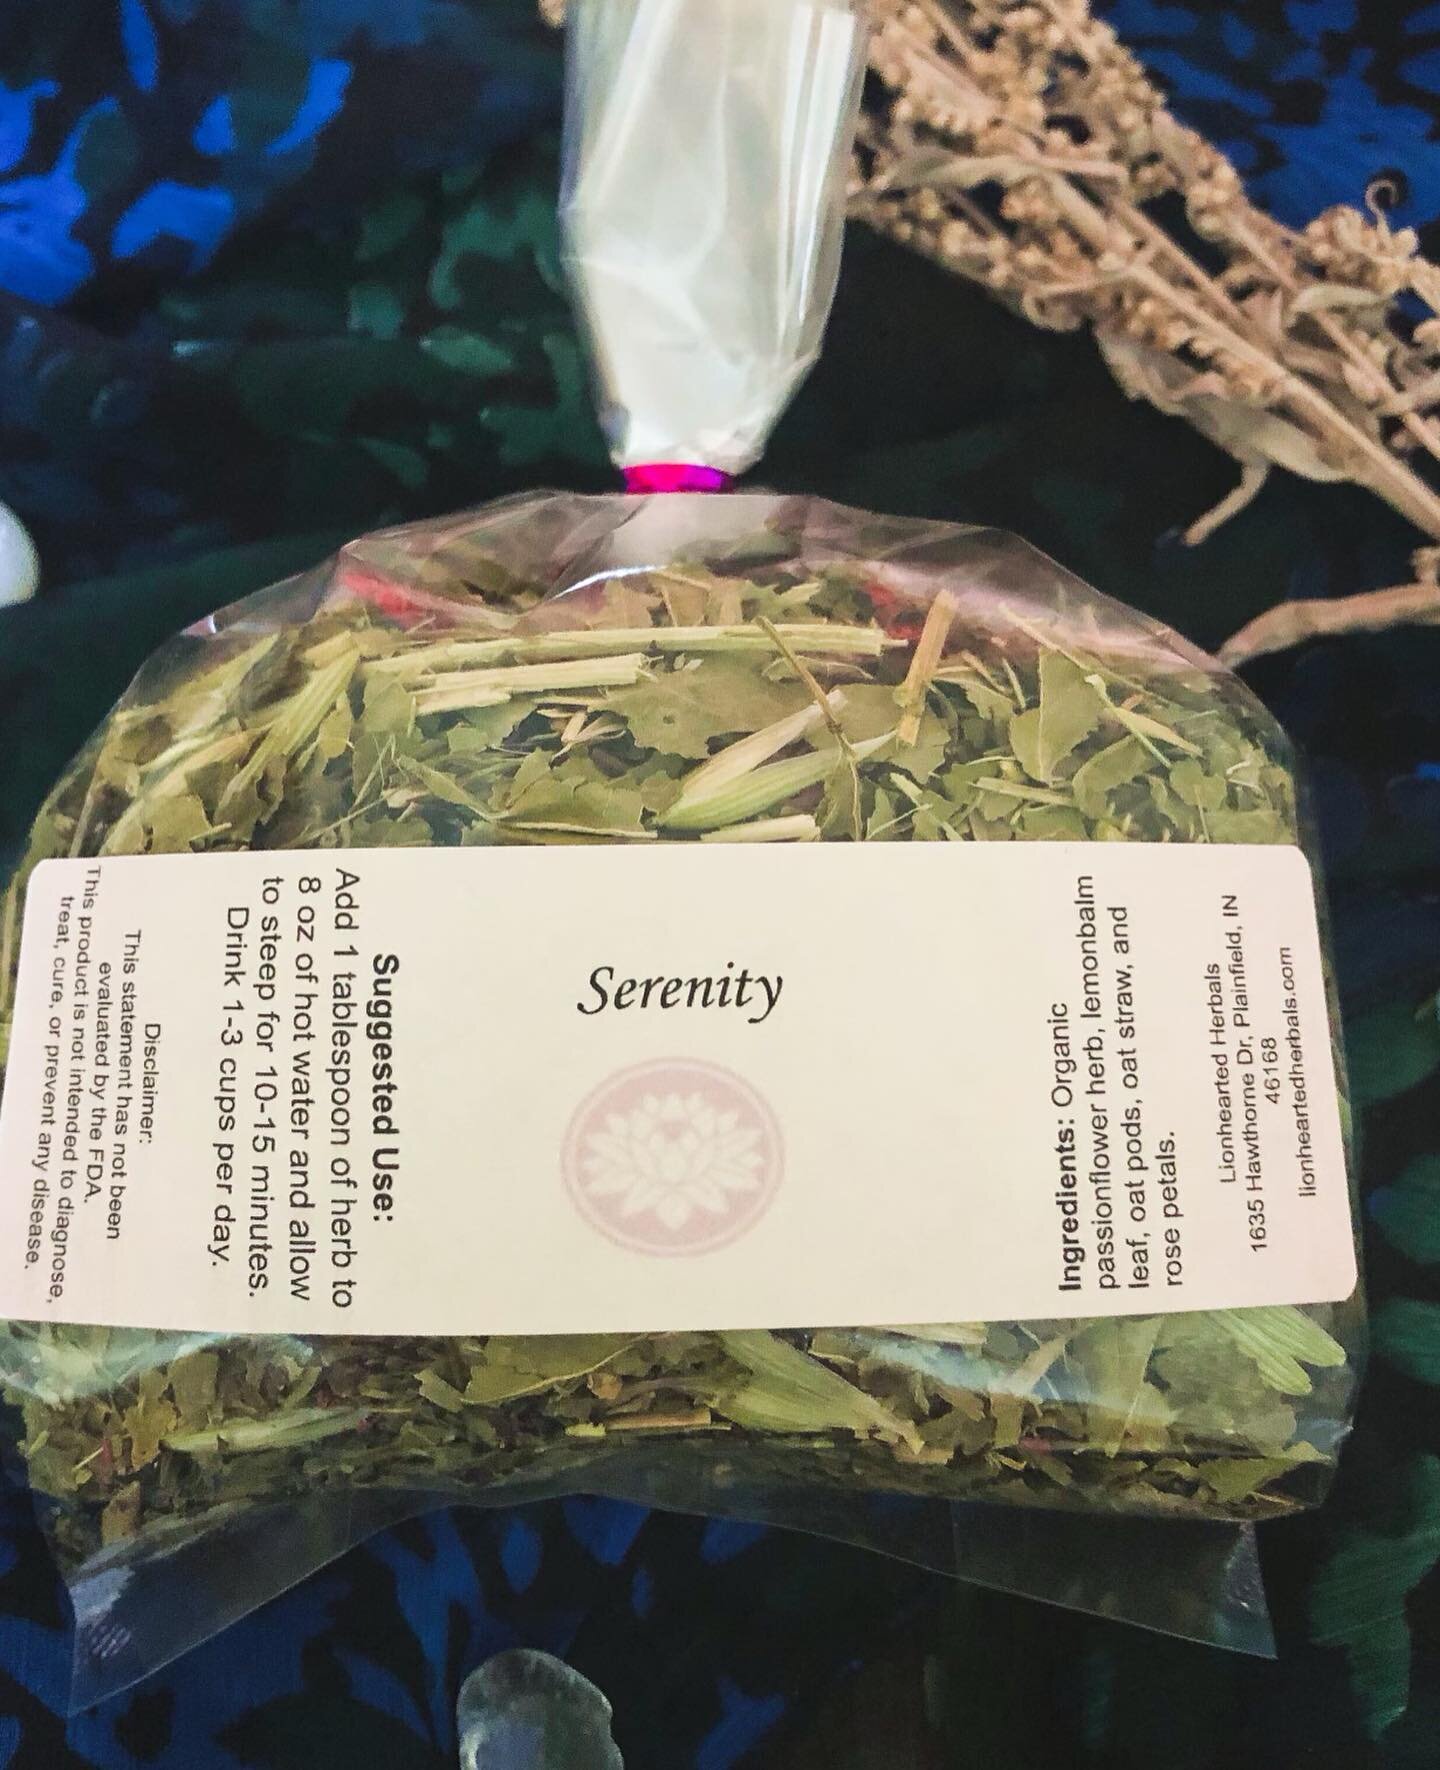 ~Serenity Tea~ ⁣
A tea that is quite literally peace in a cup. Passionflower and lemonbalm are great daytime anxiety soothers that are loved by my clients who suffer from panic attacks. Oat straw and milky oat pods provide deep replenishing nourishme